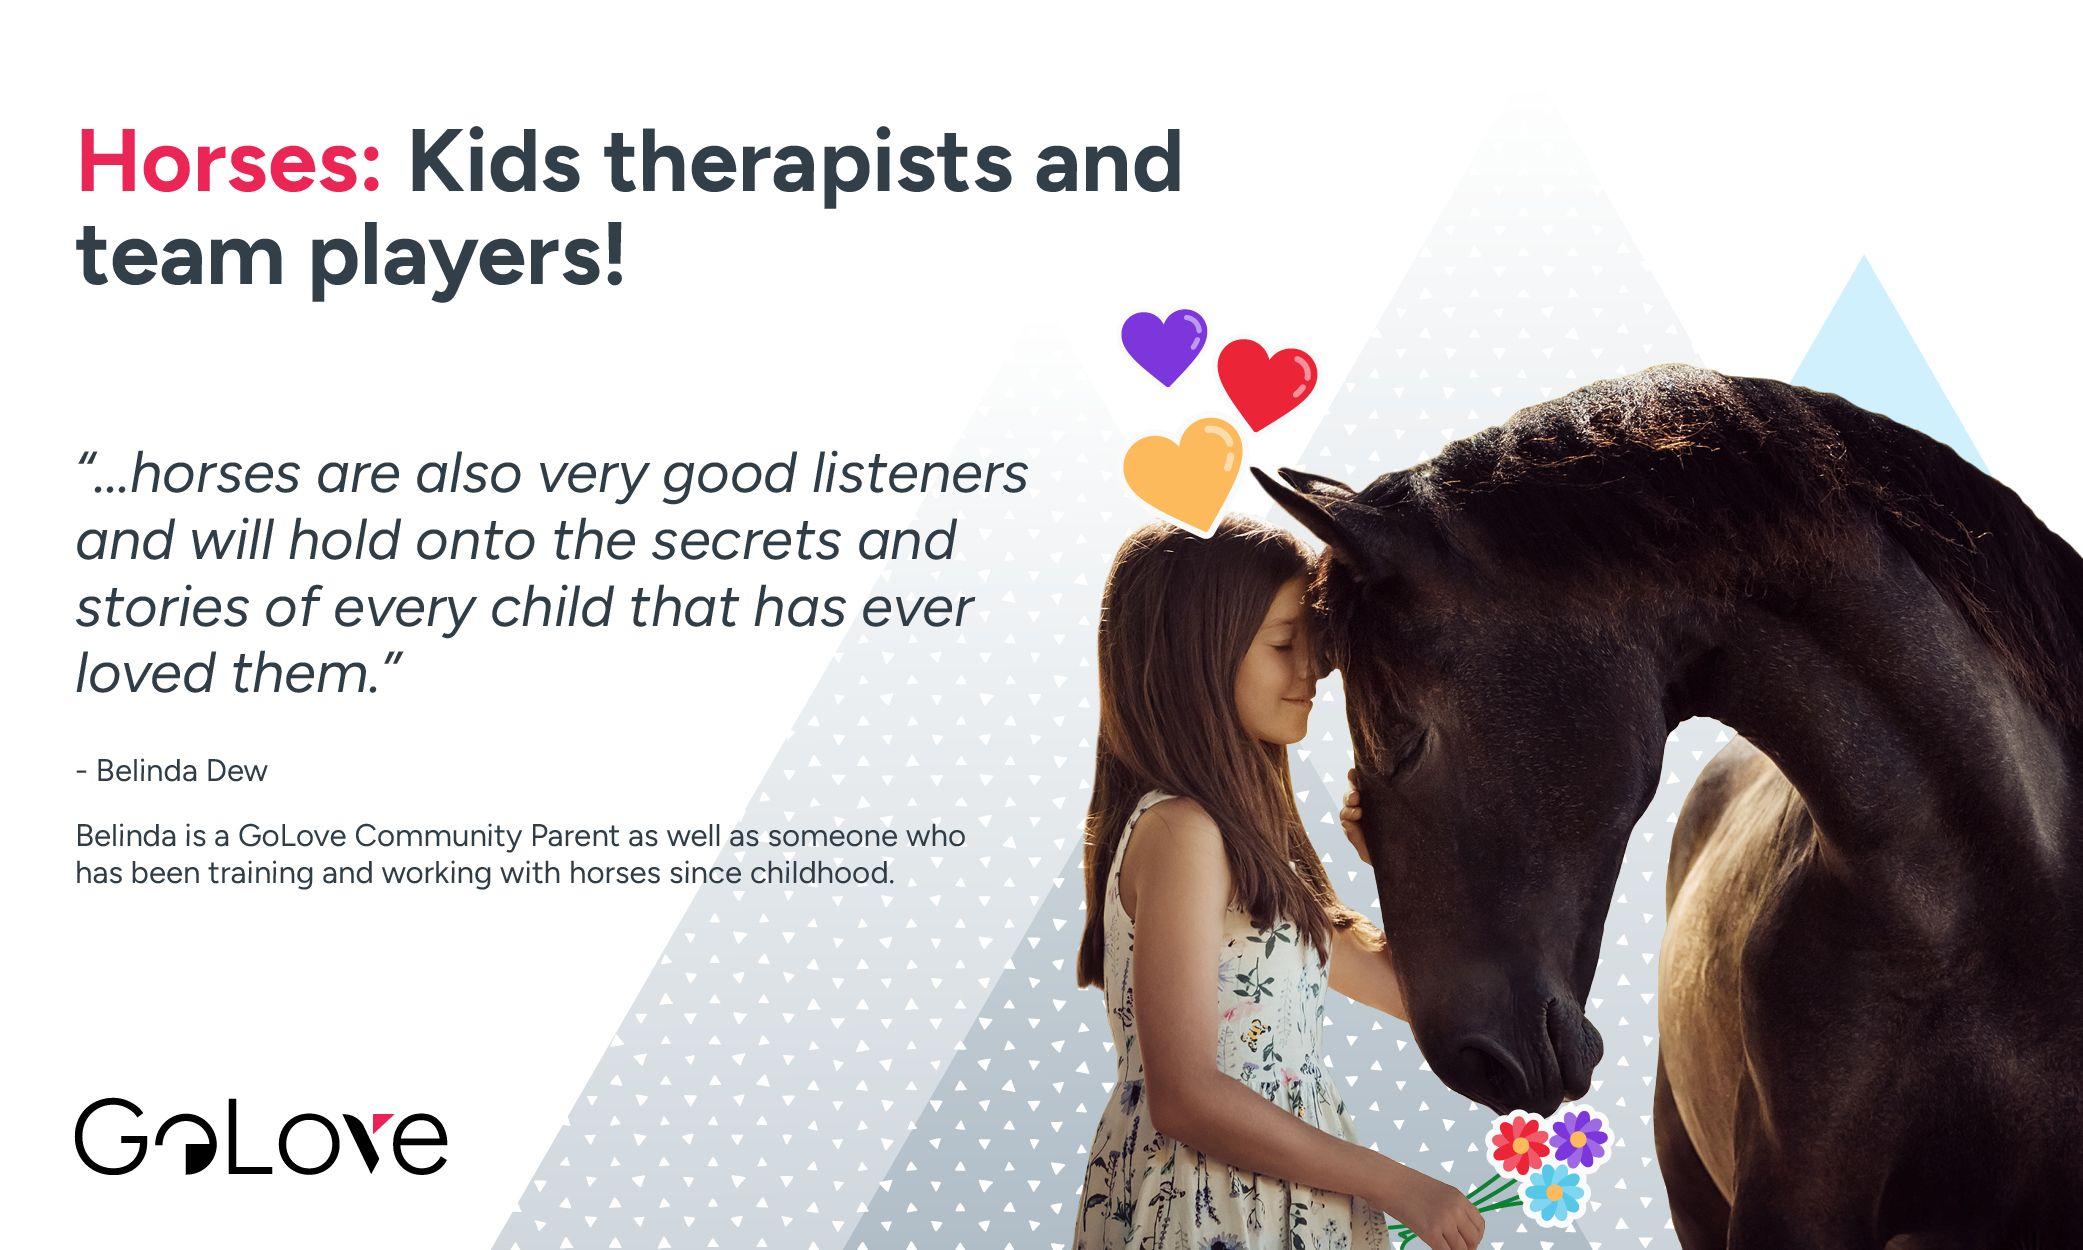 Horses: Kids, therapists and team players!  featured image